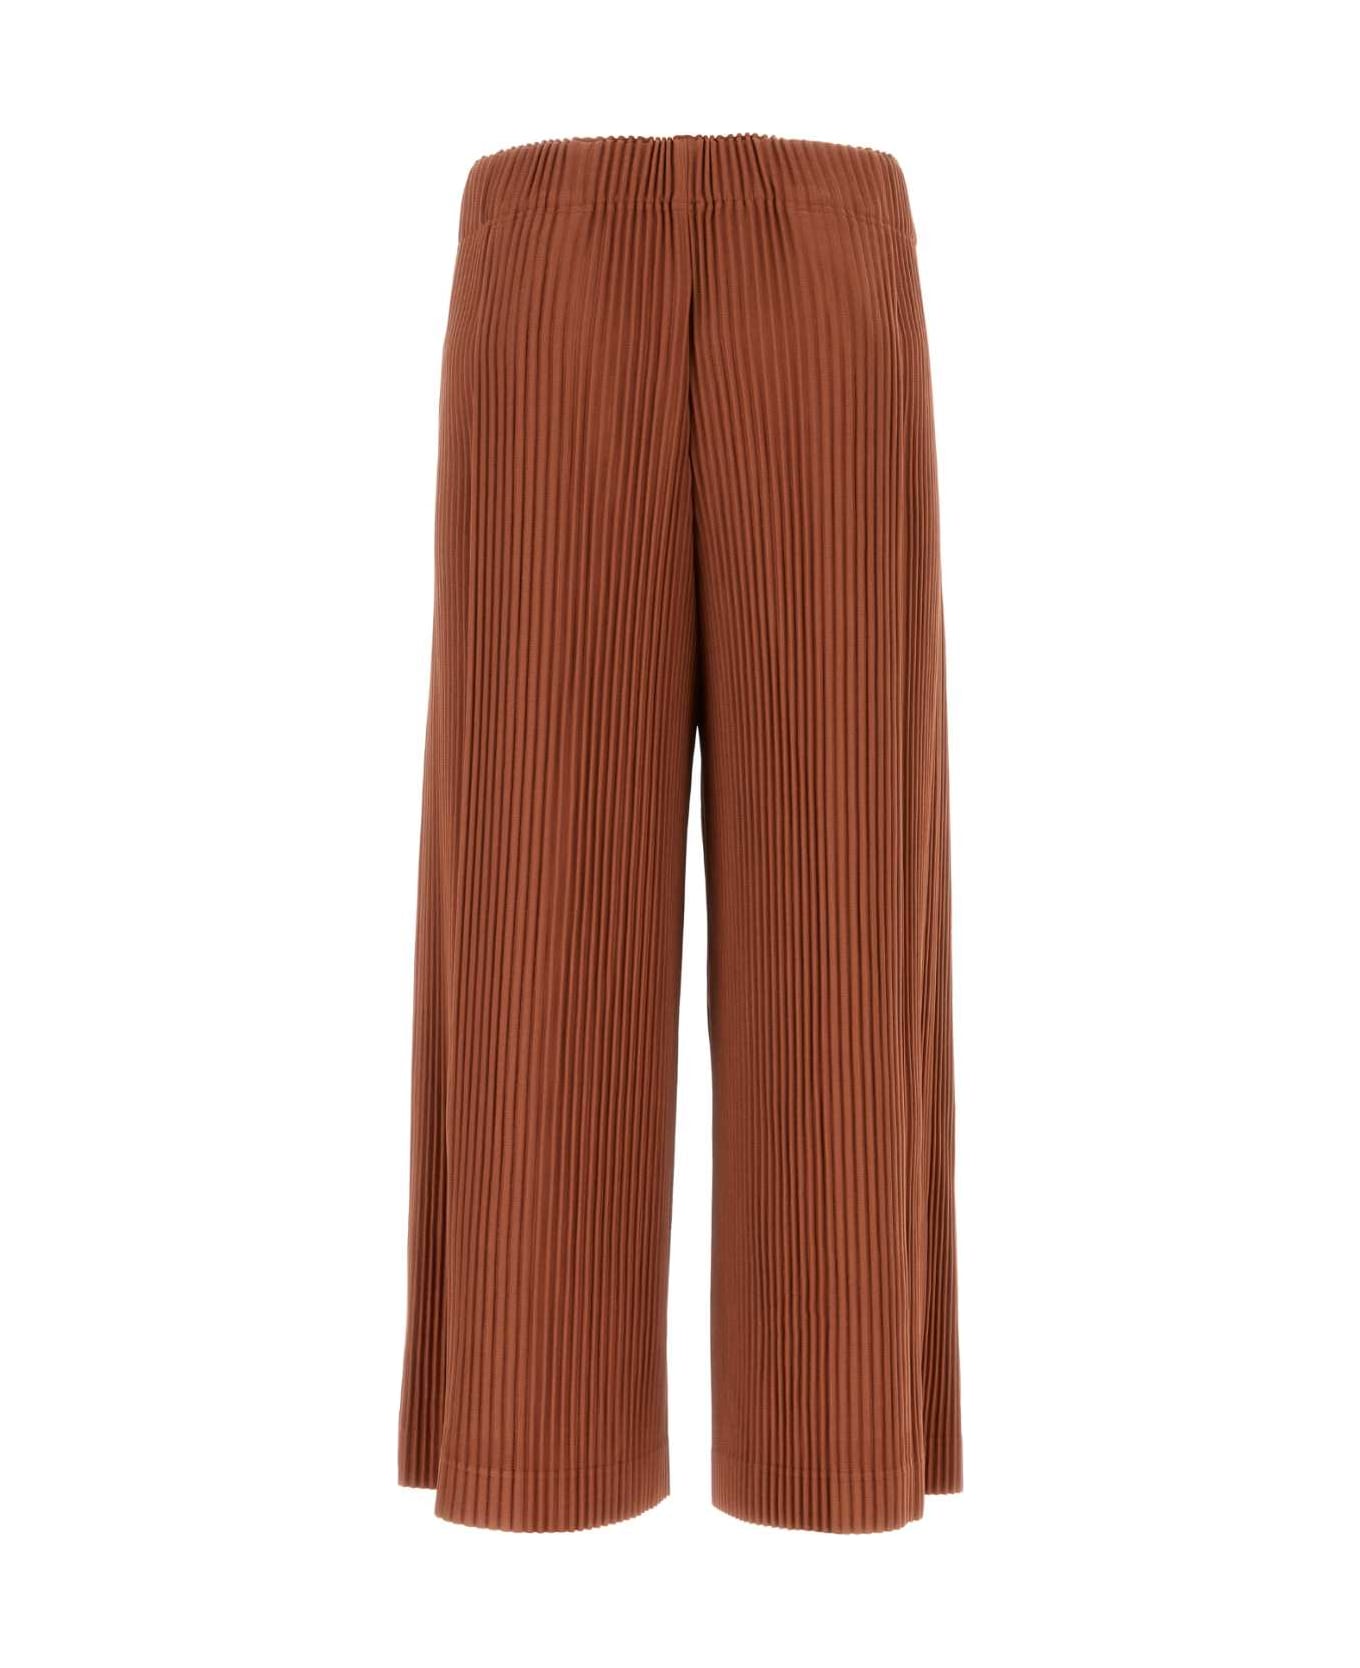 Homme Plissé Issey Miyake Copper Polyester Wide-leg Pant - GINGERBROWN